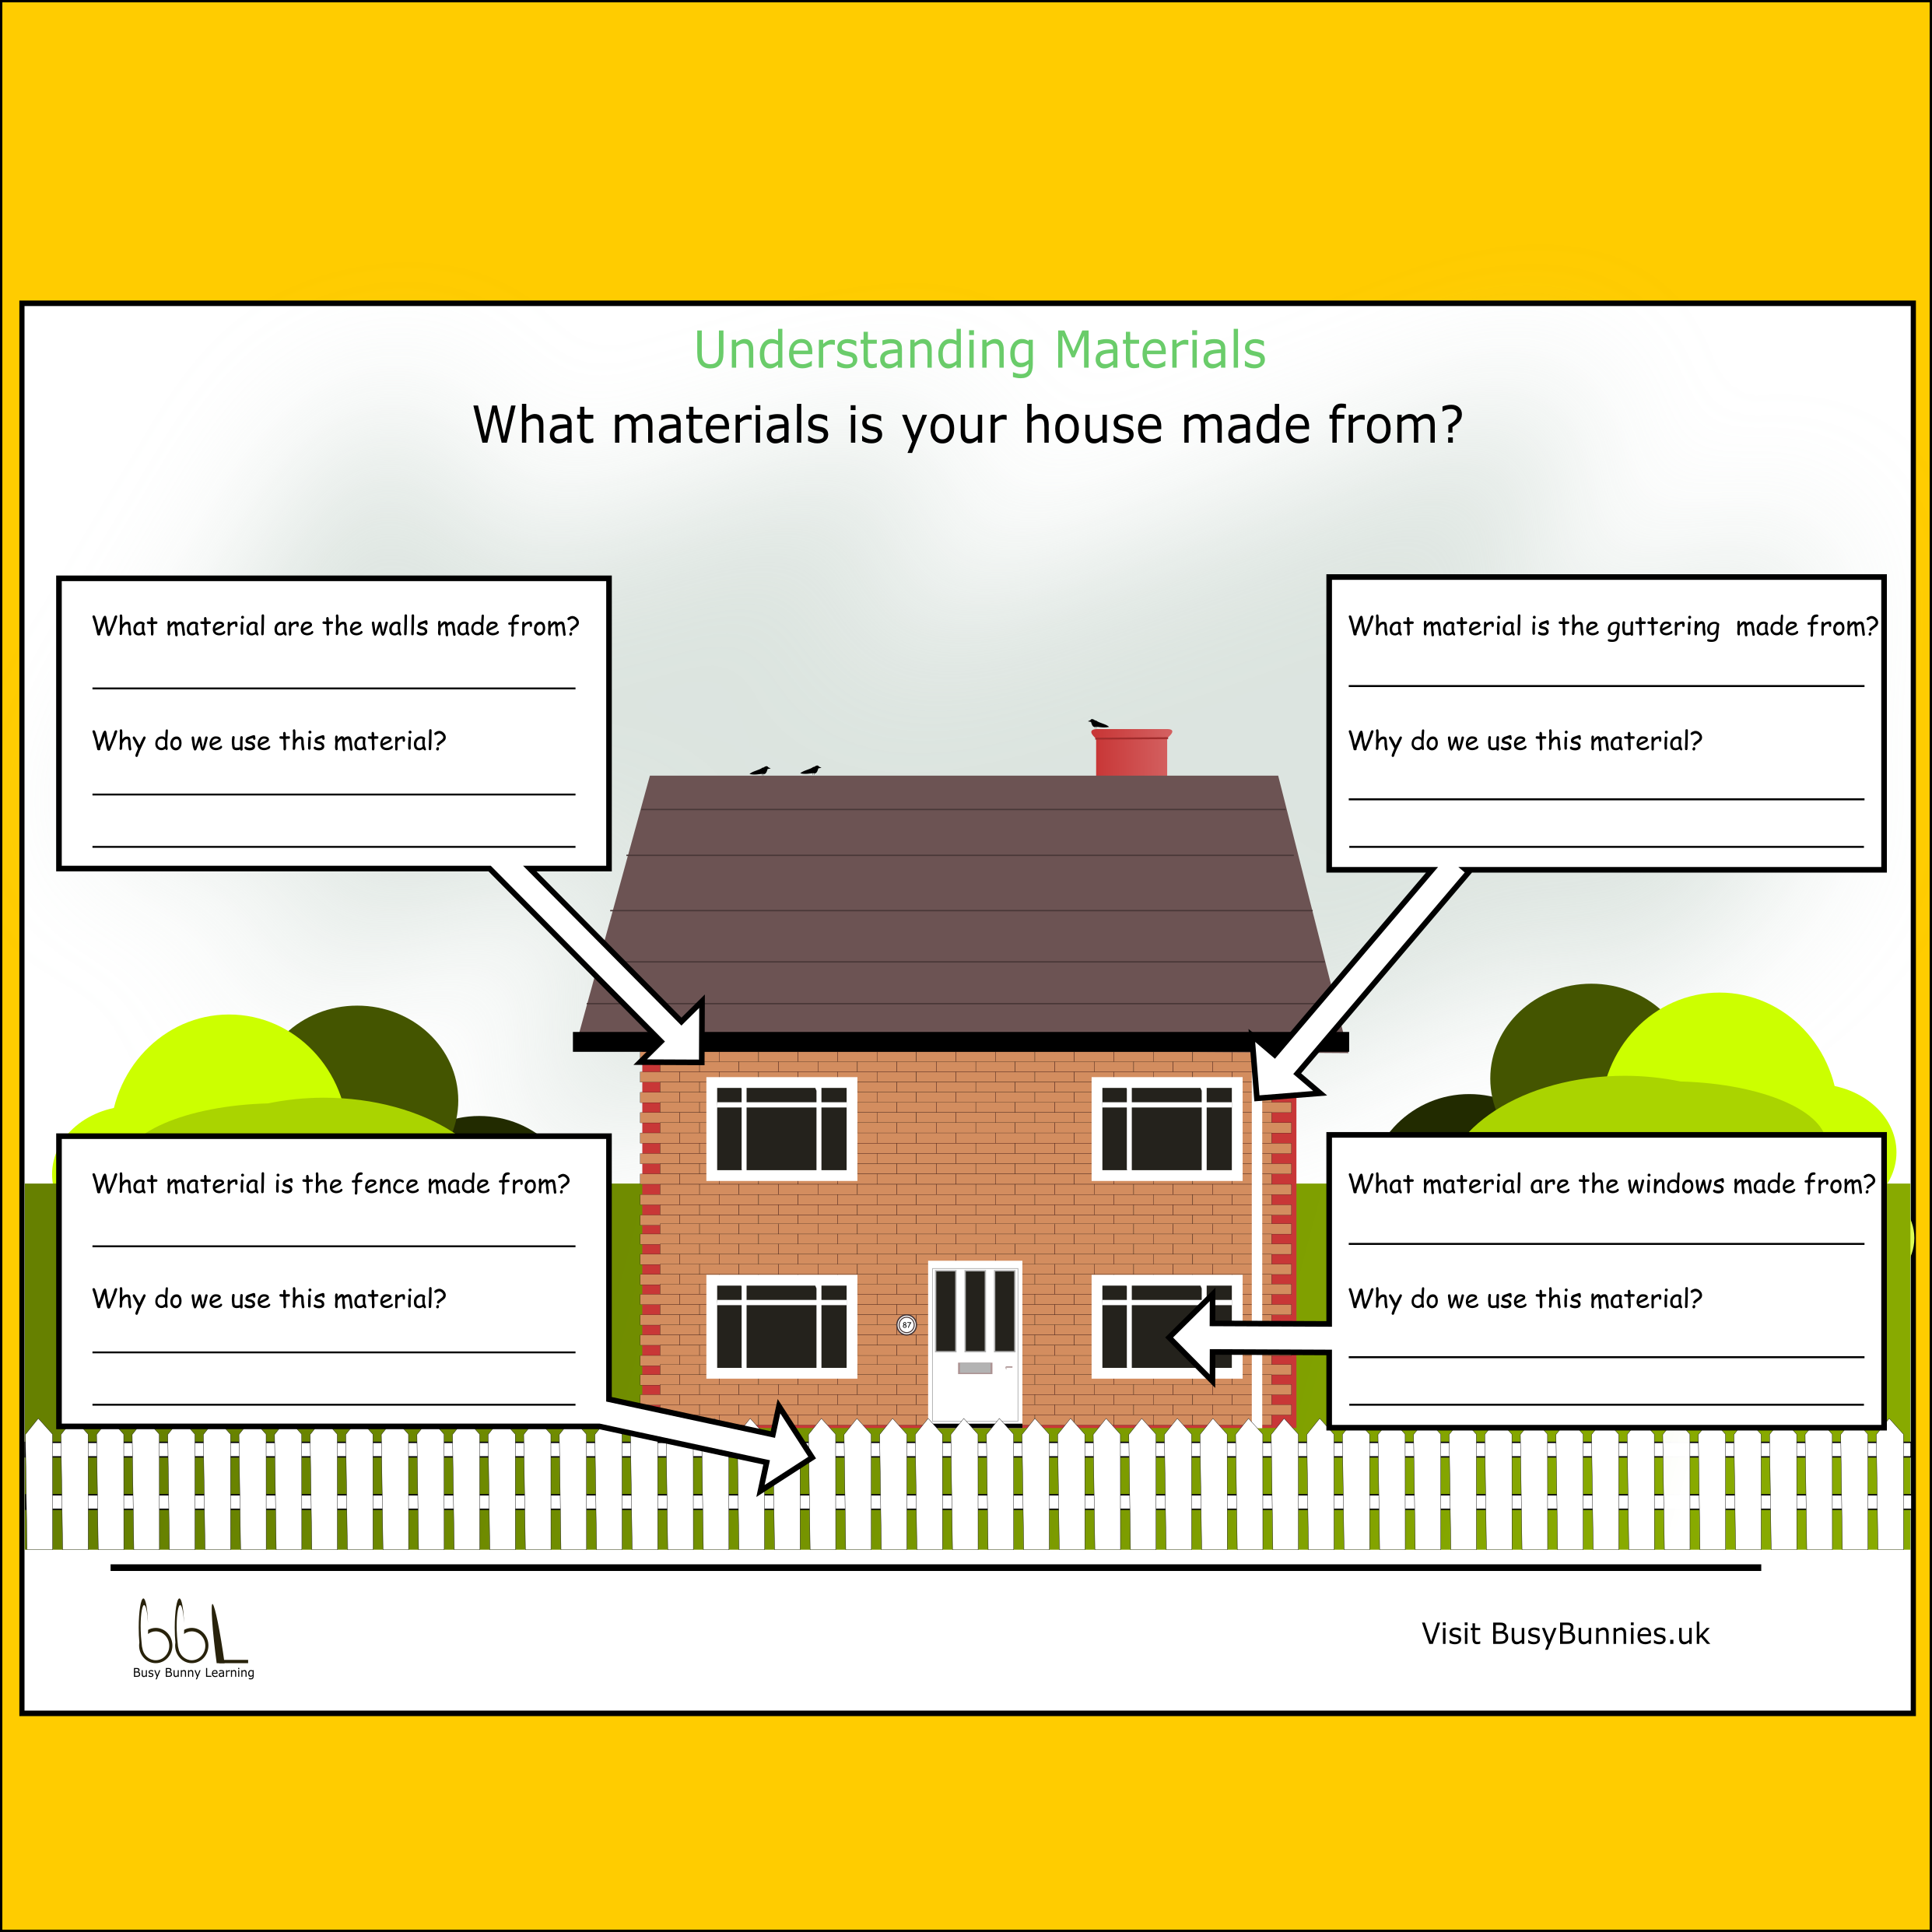 Understanding Materials - What Materials is Your House Made From PNG